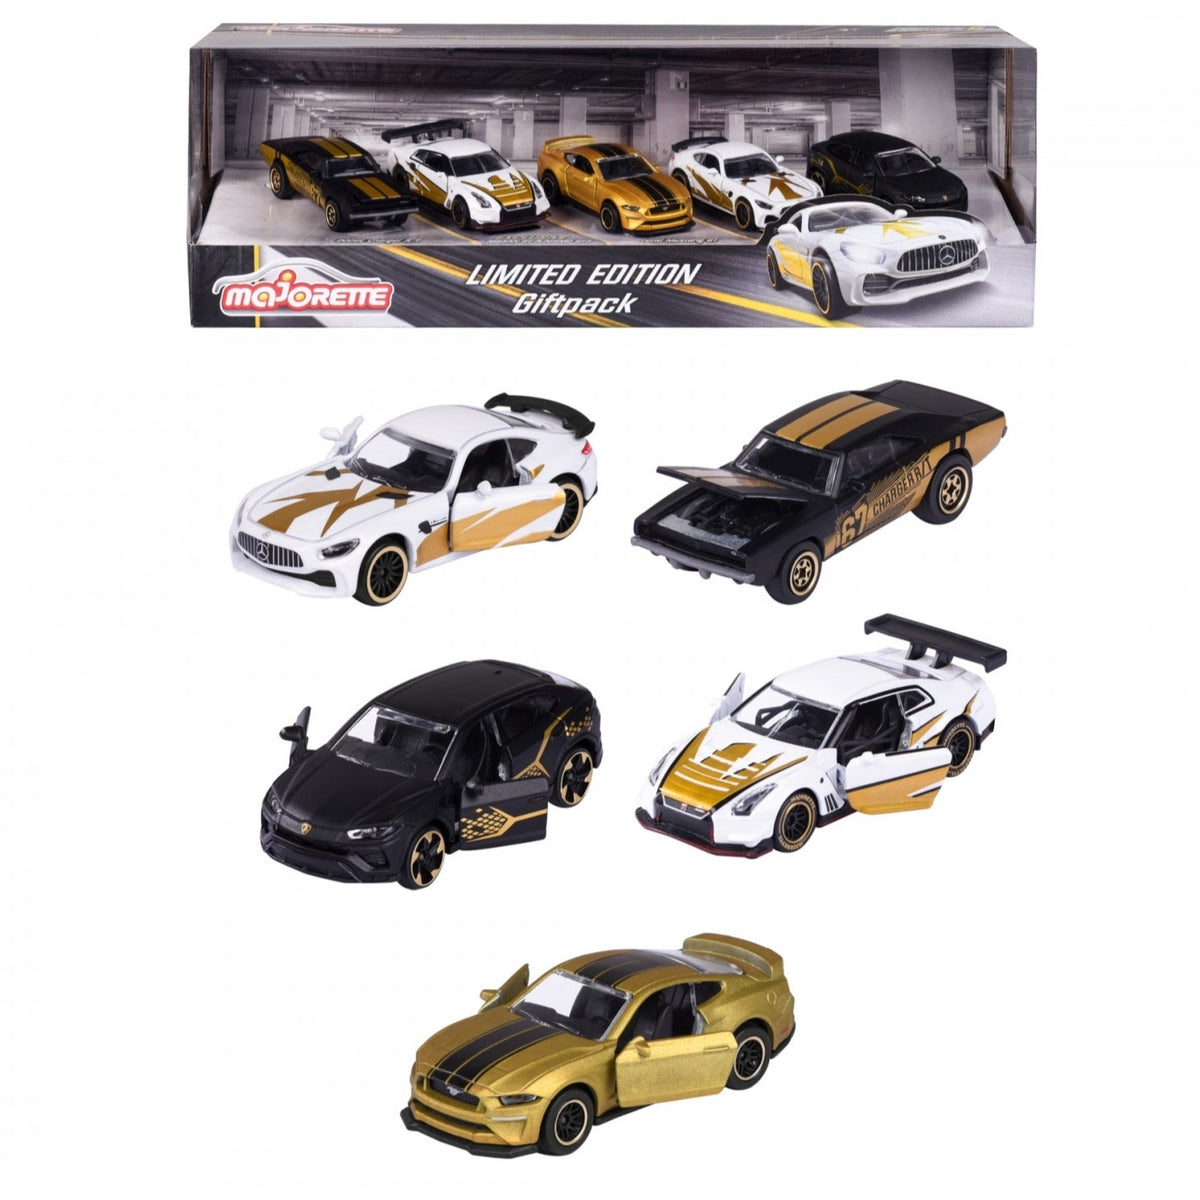 Majorette Limited Edition 9 Series 5 Car Gift Set For Kids Ages 3+